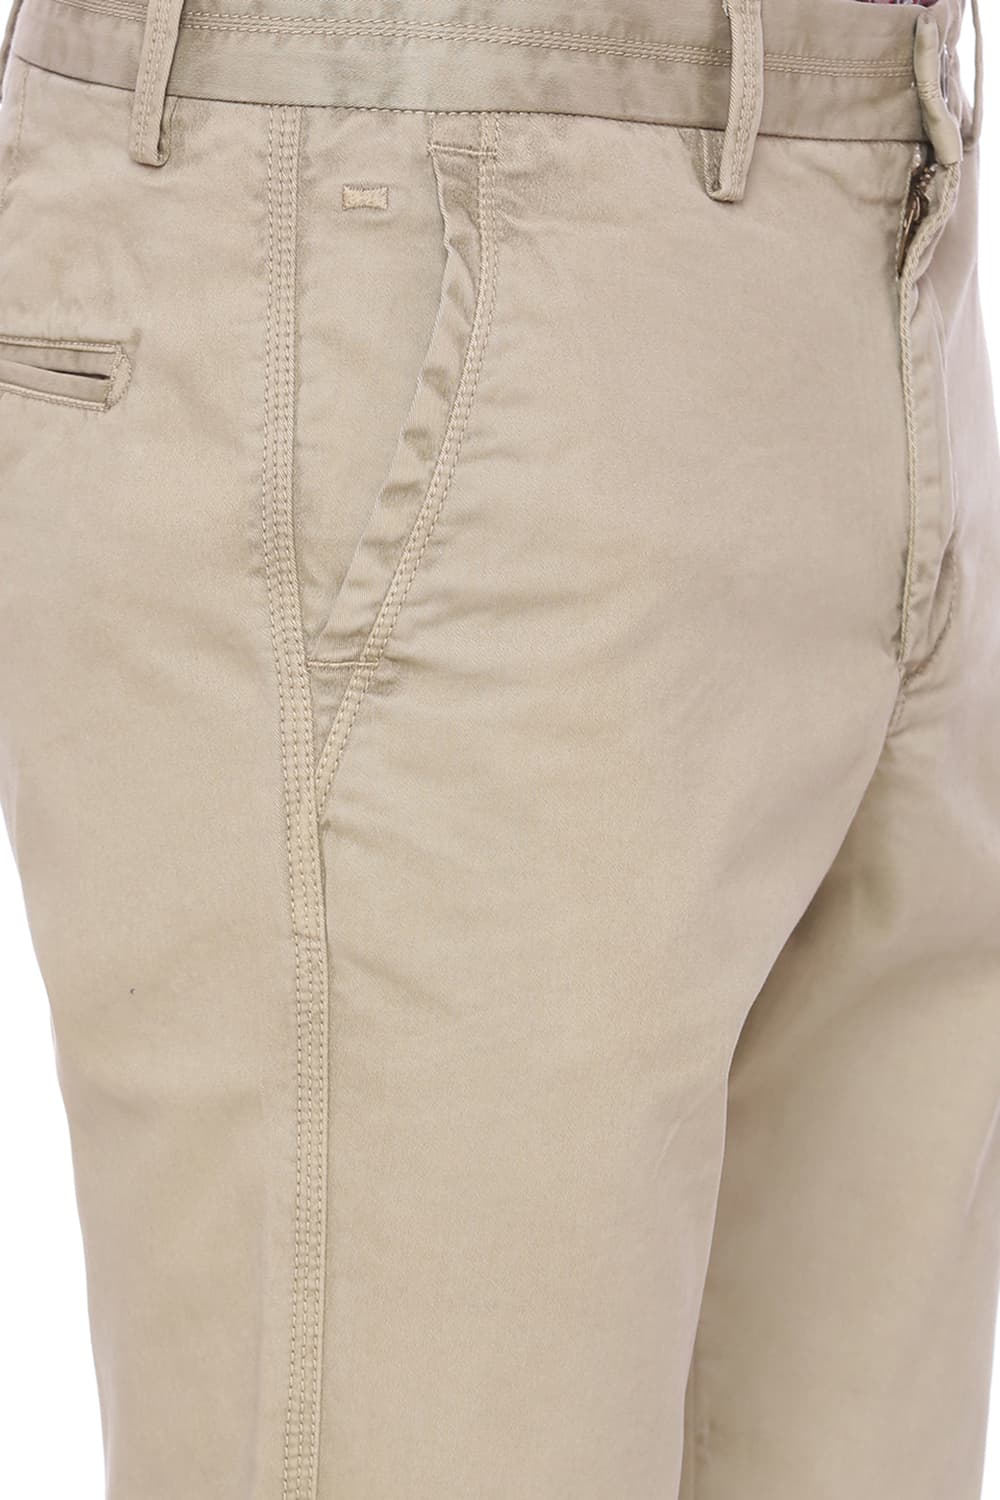 BASICS TAPERED FIT TWILL STRETCH TROUSER